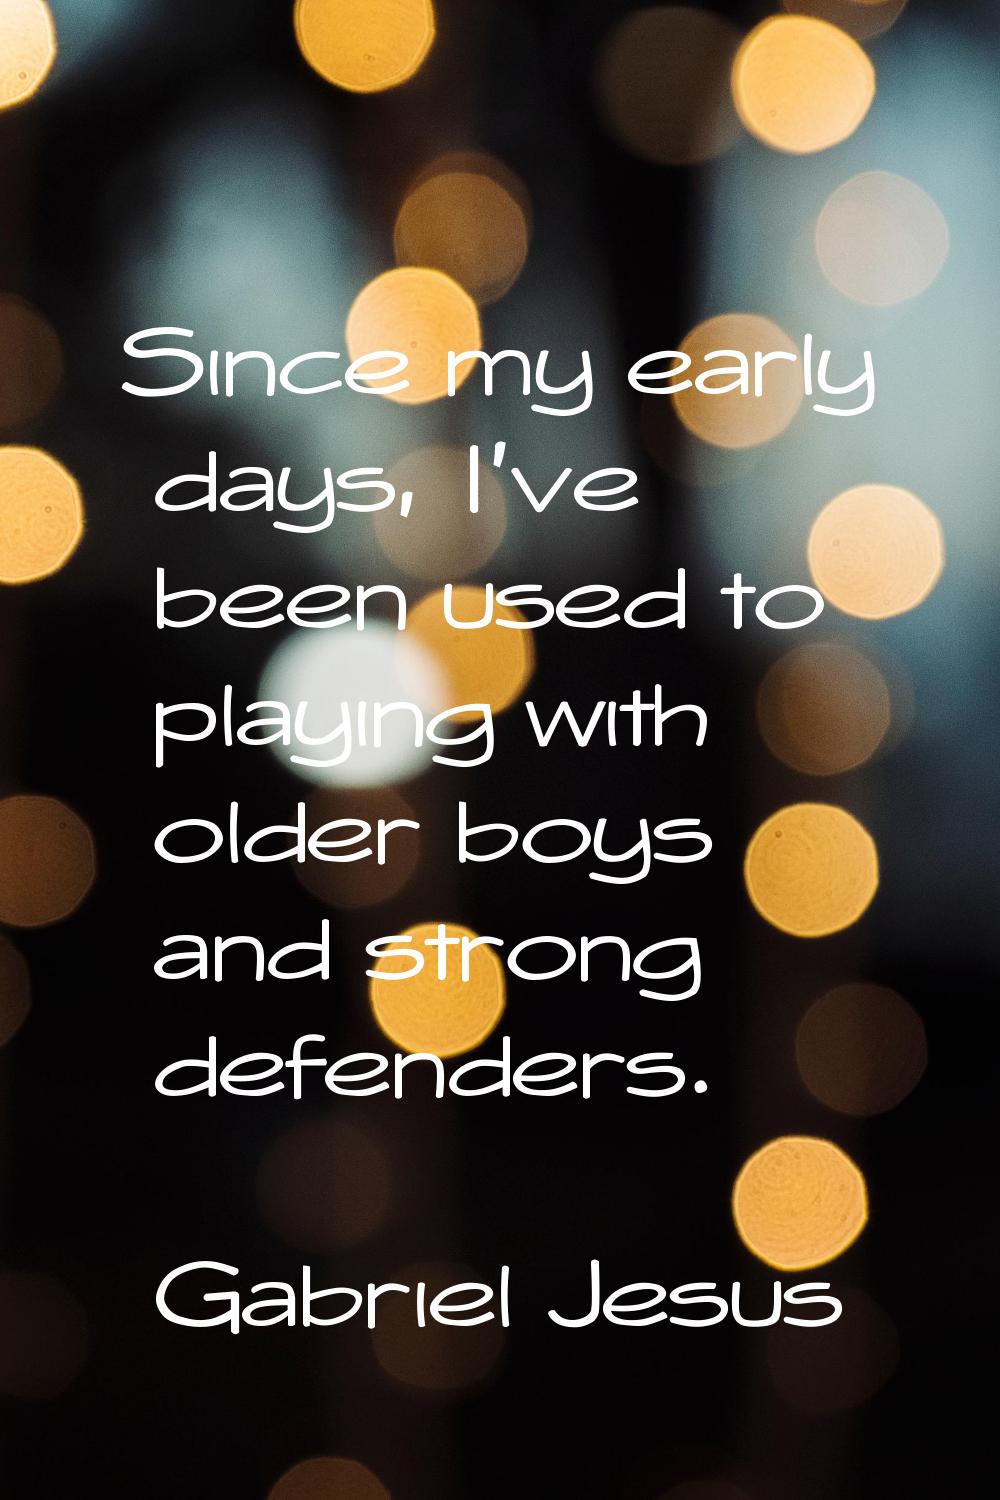 Since my early days, I've been used to playing with older boys and strong defenders.